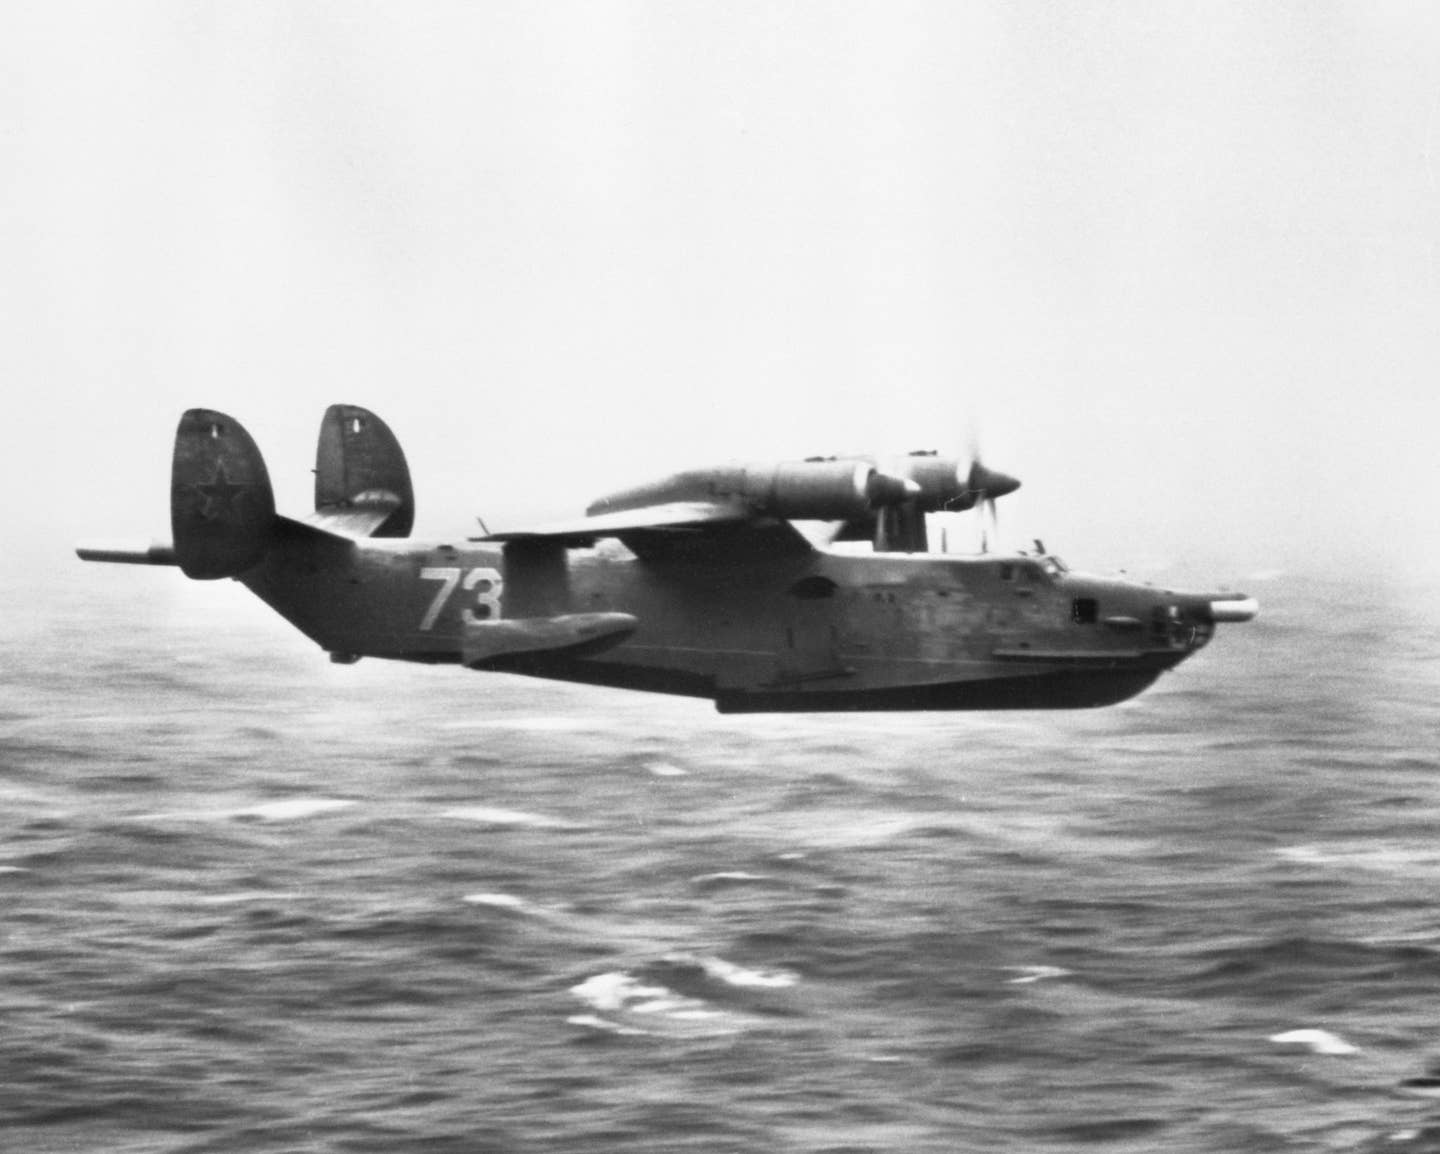 A right-side view of a Soviet Be-12 Mail patrol/anti-submarine warfare aircraft in flight. (U.S. Navy photo)